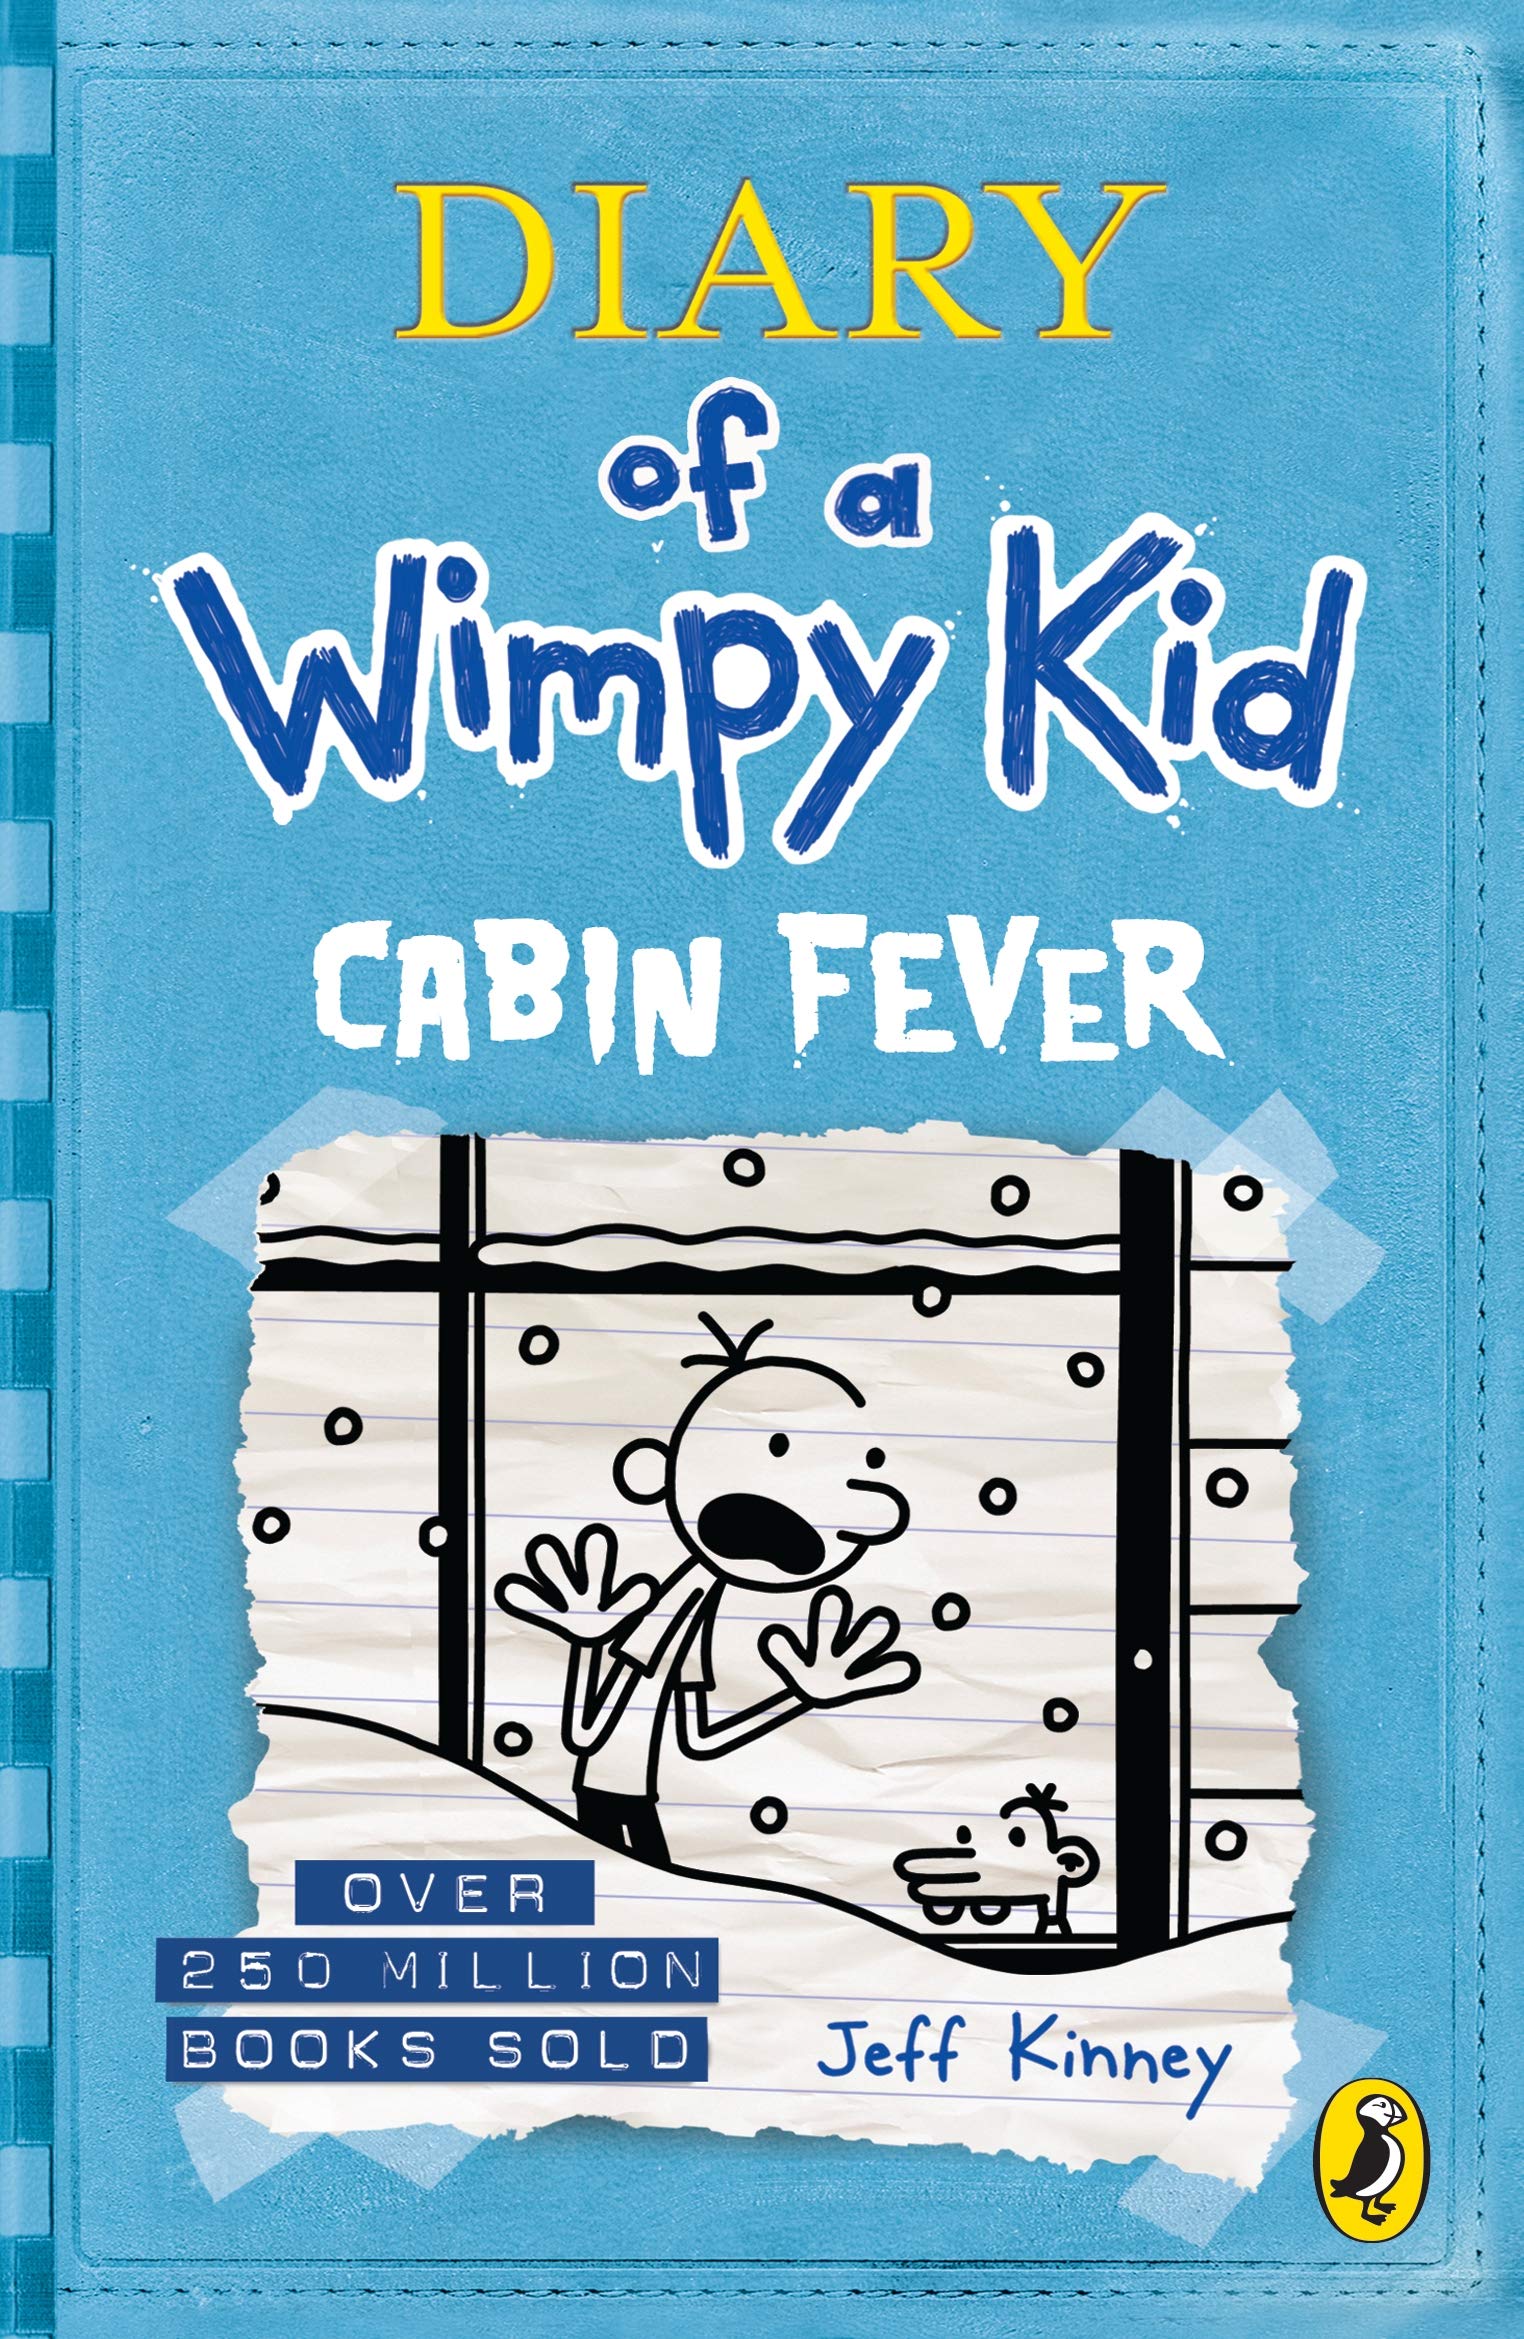 Diary of a Wimpy Kid (6): Cabin Fever